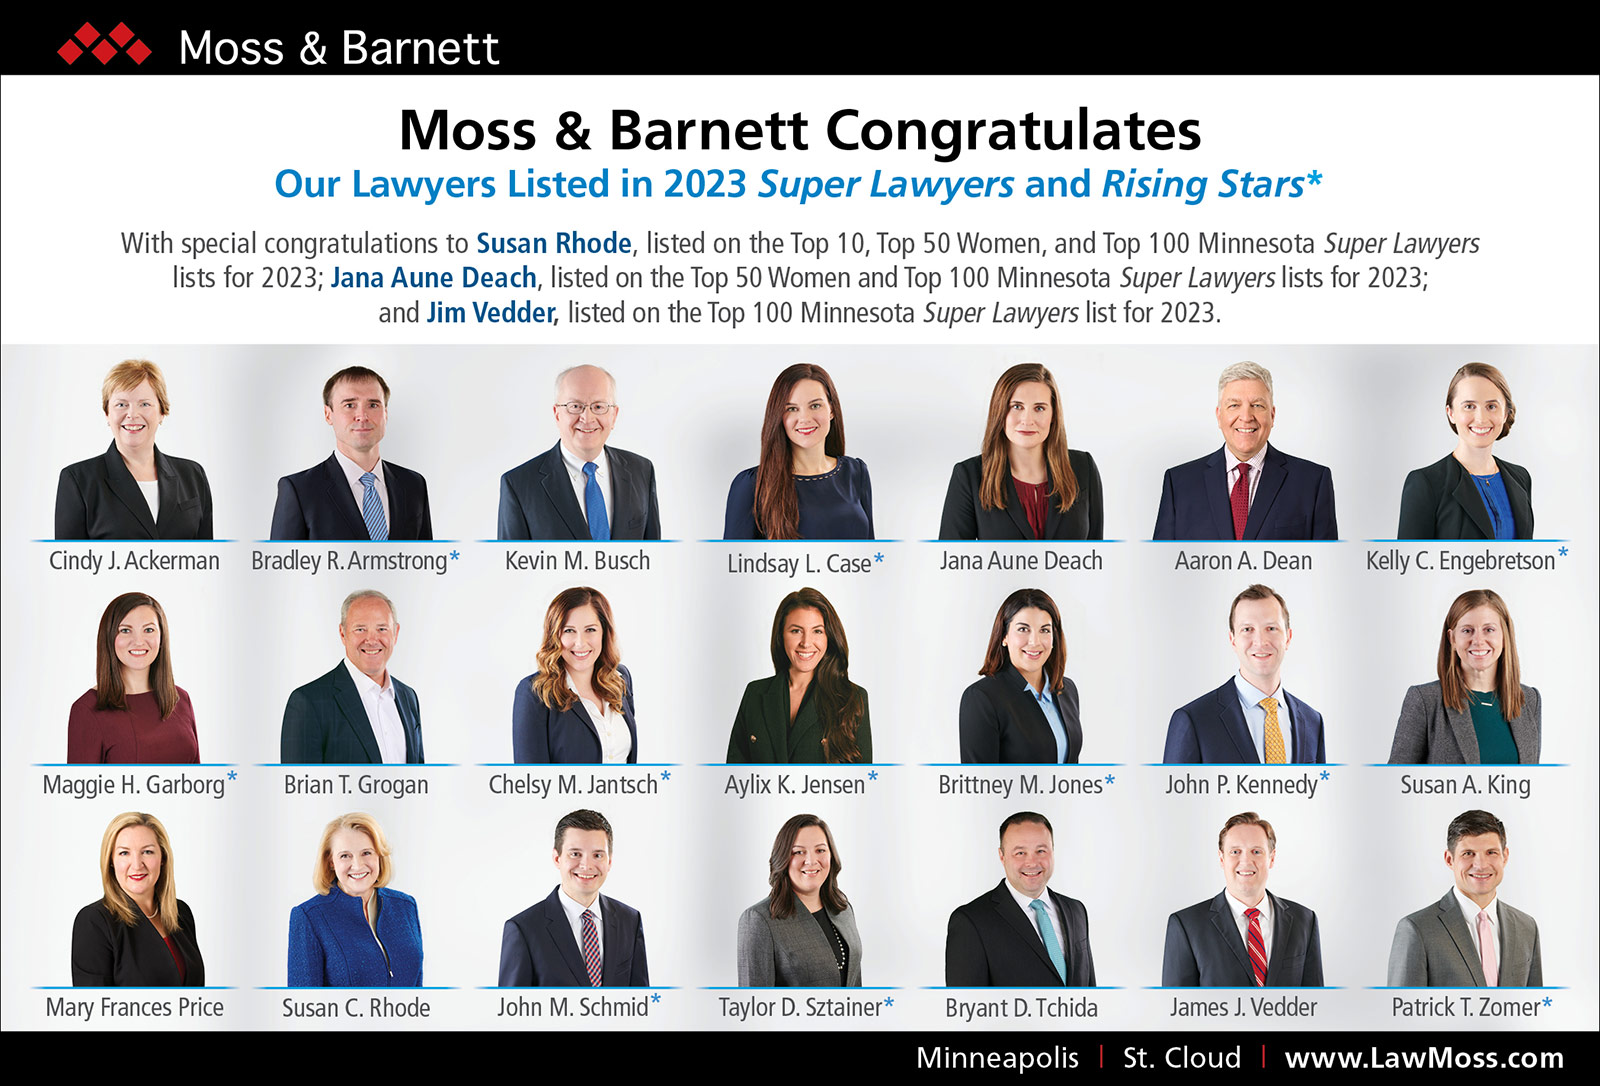 2023 Super Lawyers and Rising Stars